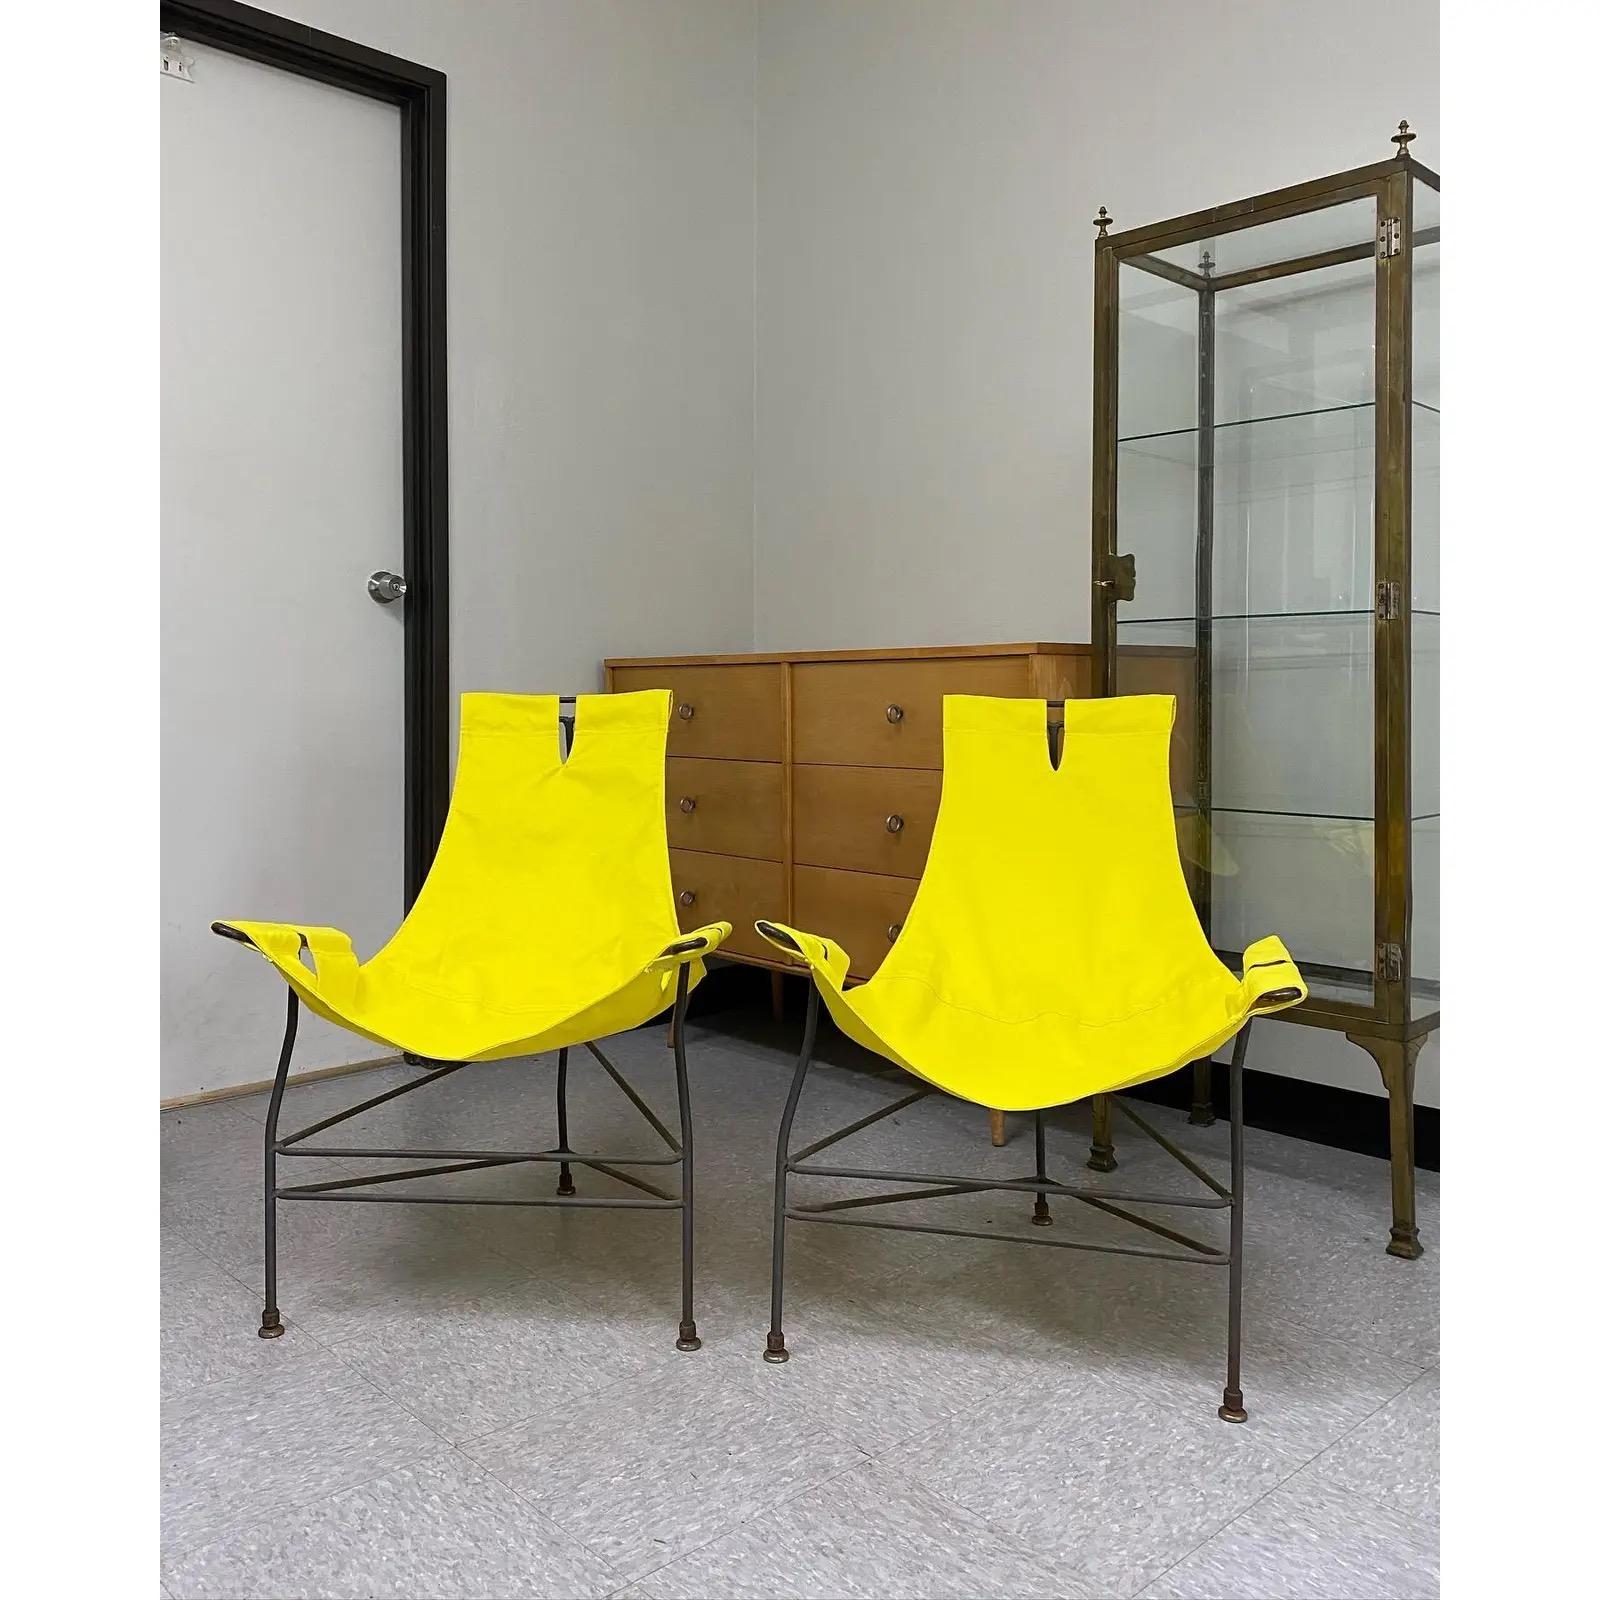 Welded Midcentury Modern Jerry Johnson Iron Sling Chairs, a Pair For Sale